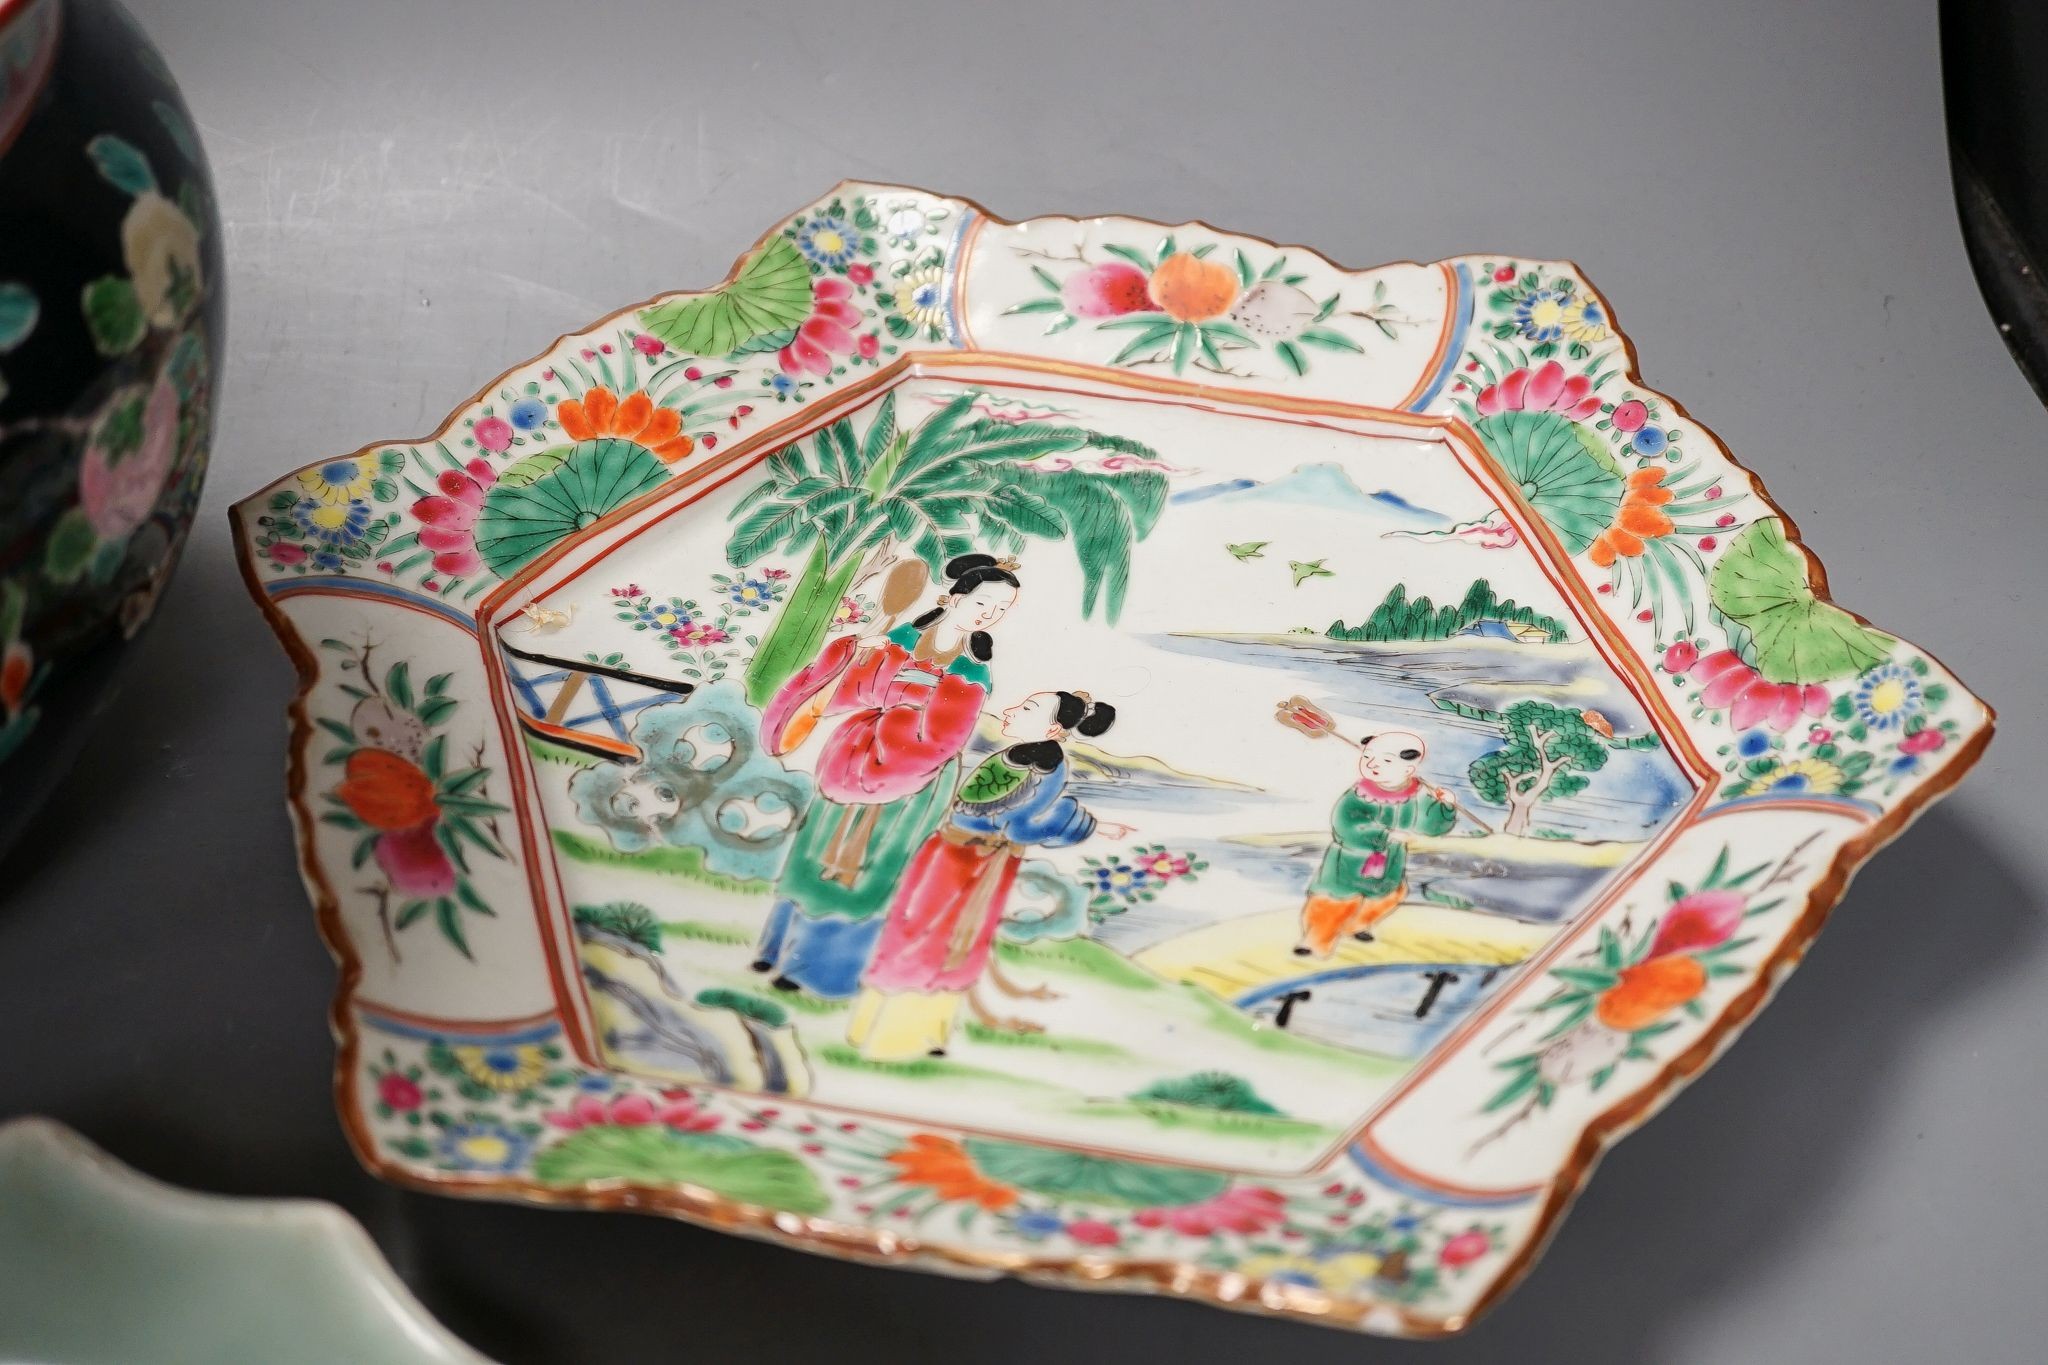 Three late 19th century Japanese porcelain dishes and a jardiniere, 19 cms high.